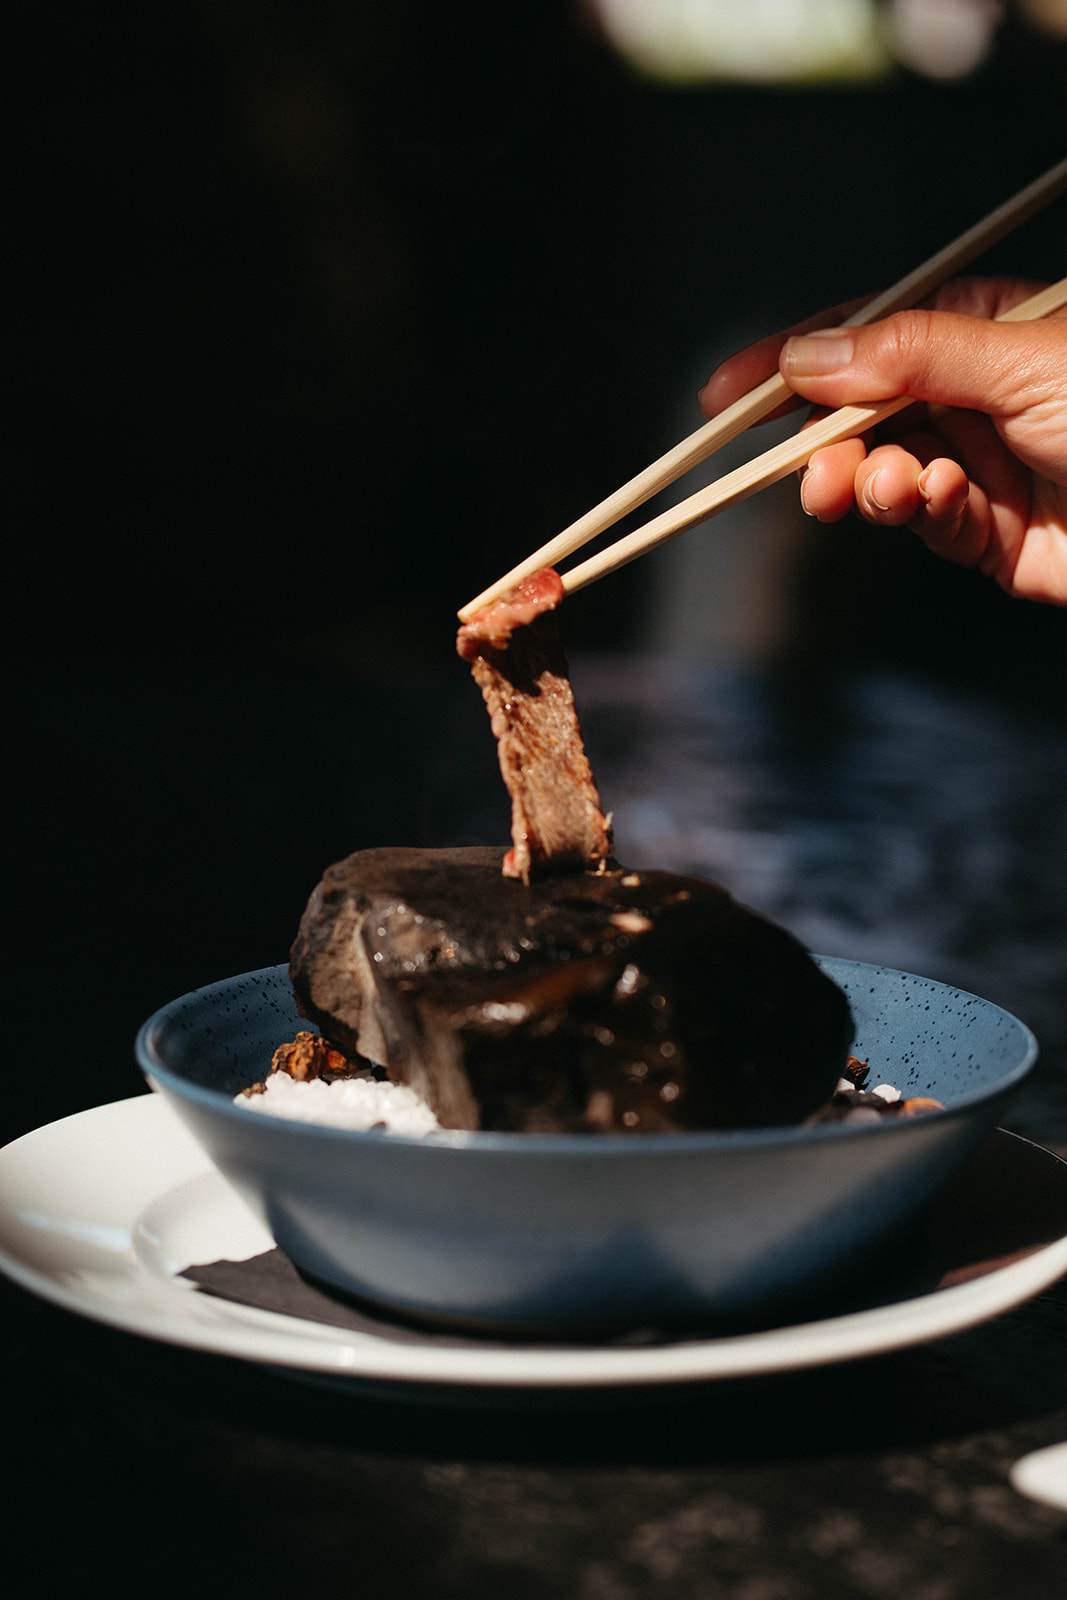 This dining experience involves preparing wagyu beef or scallops over a hot rock at your table - by you! – Brooke